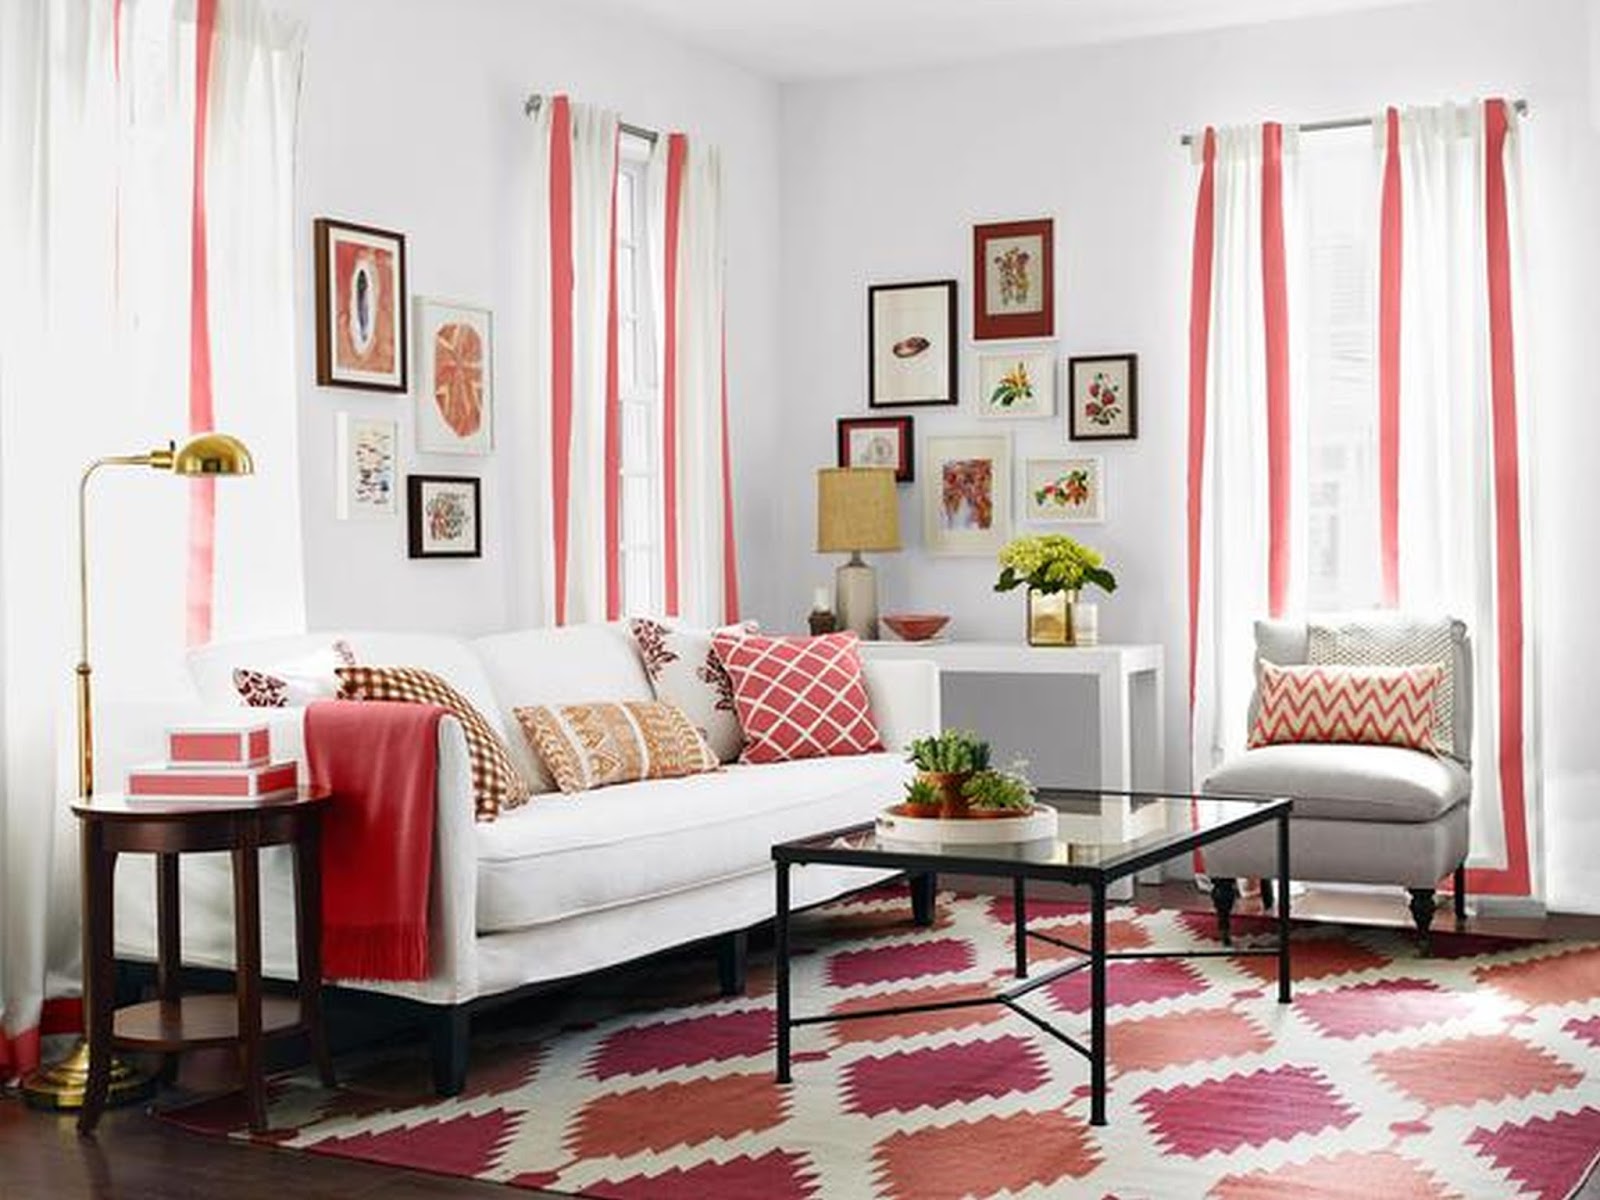 modern-interior-decorating-ideas-red-and-white-color-in-modern-interior-design-ideas-living-room-with-red-color-schemes-with-modern-white-sofa